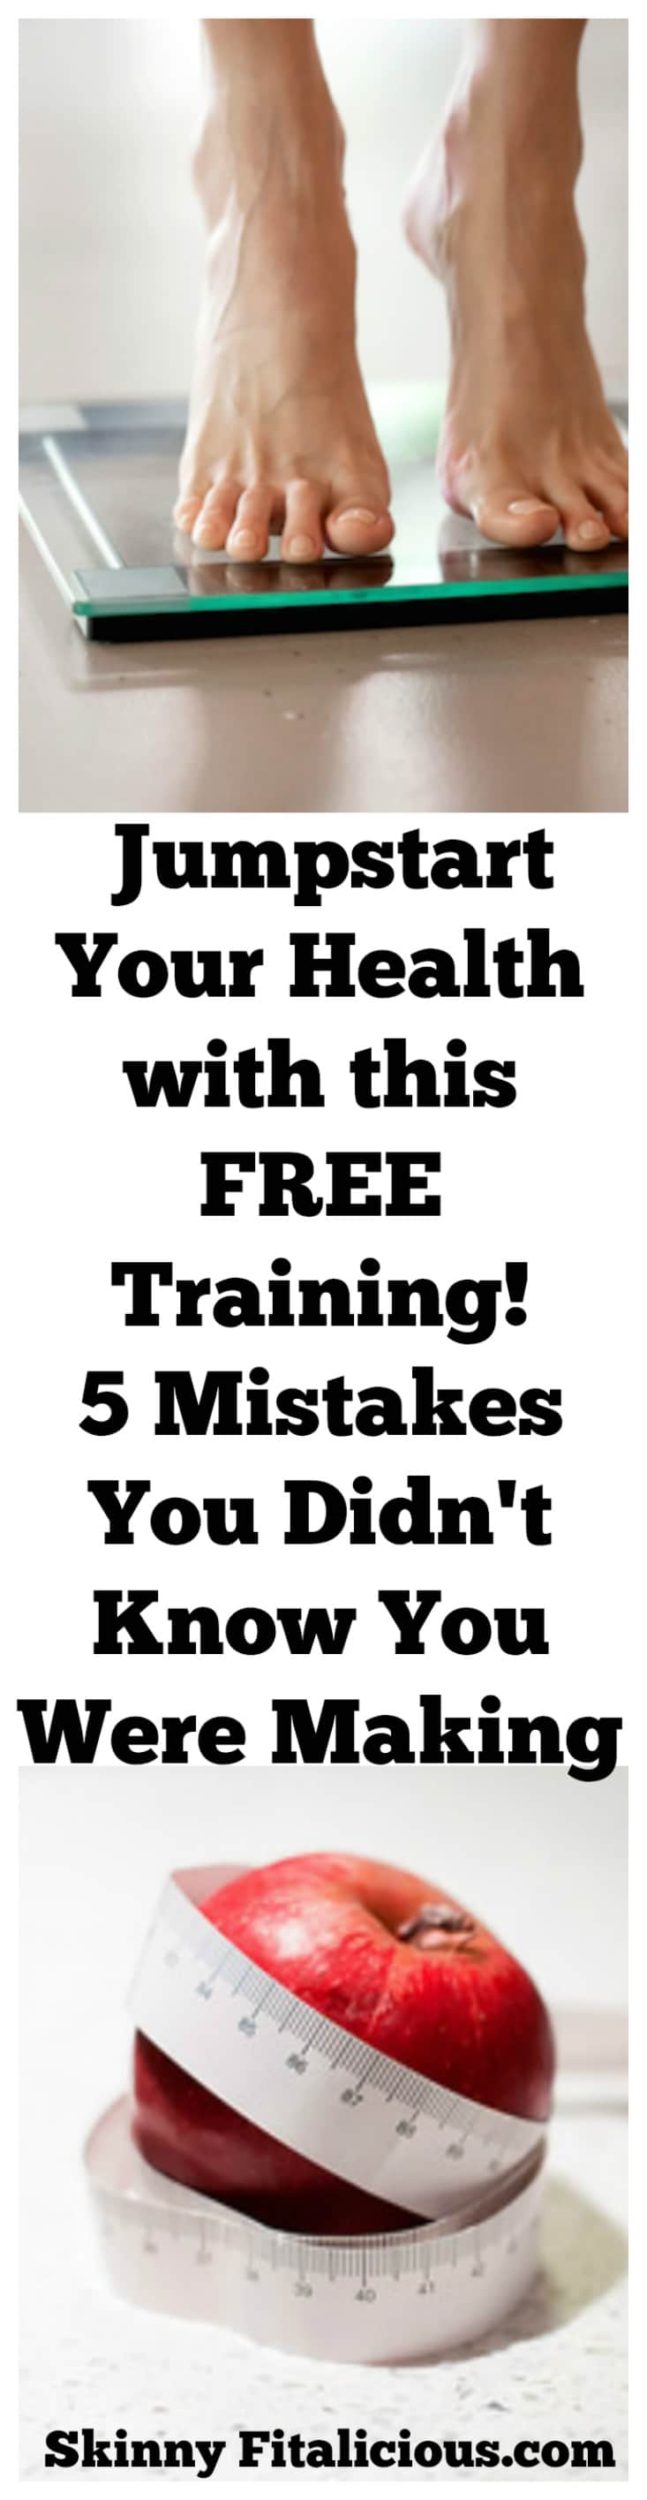 Are you trying to lose weight? Here's how to Jump Start Your Health plus a FREE training on 5 mistakes you didn't know you were making!